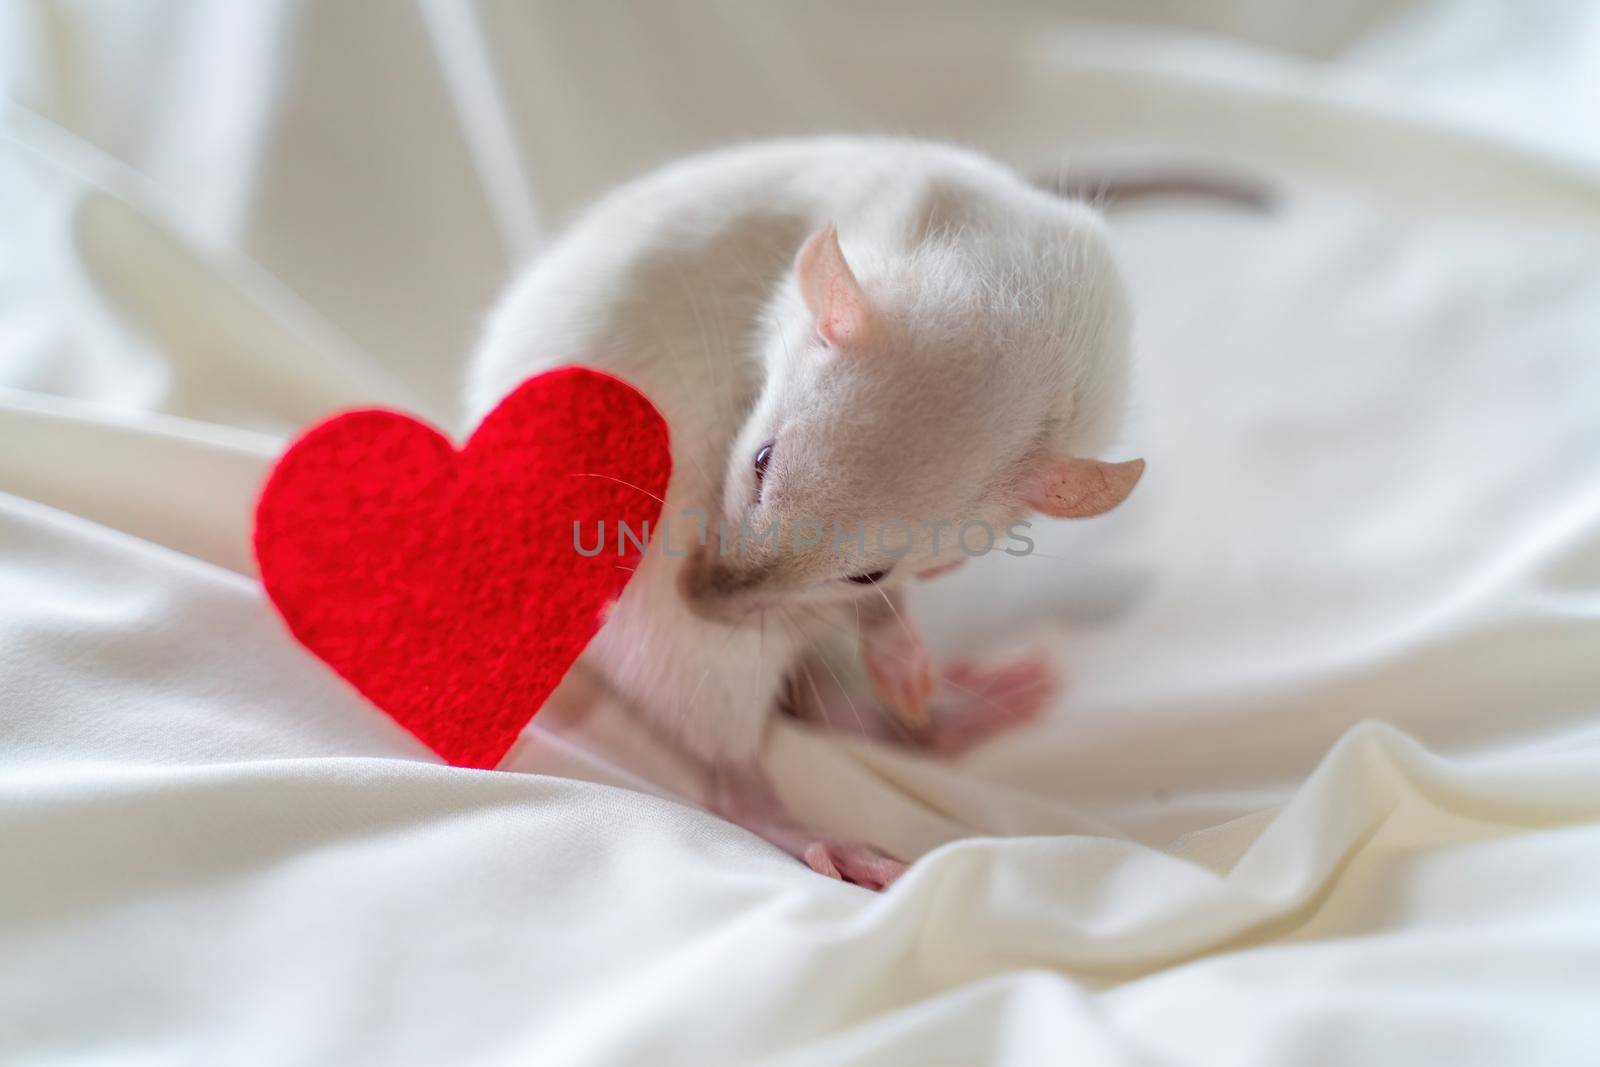 Little white rat in a female hand with manicure. On a light background. Nearby lies a red heart. Valentine's day concept, cute picture